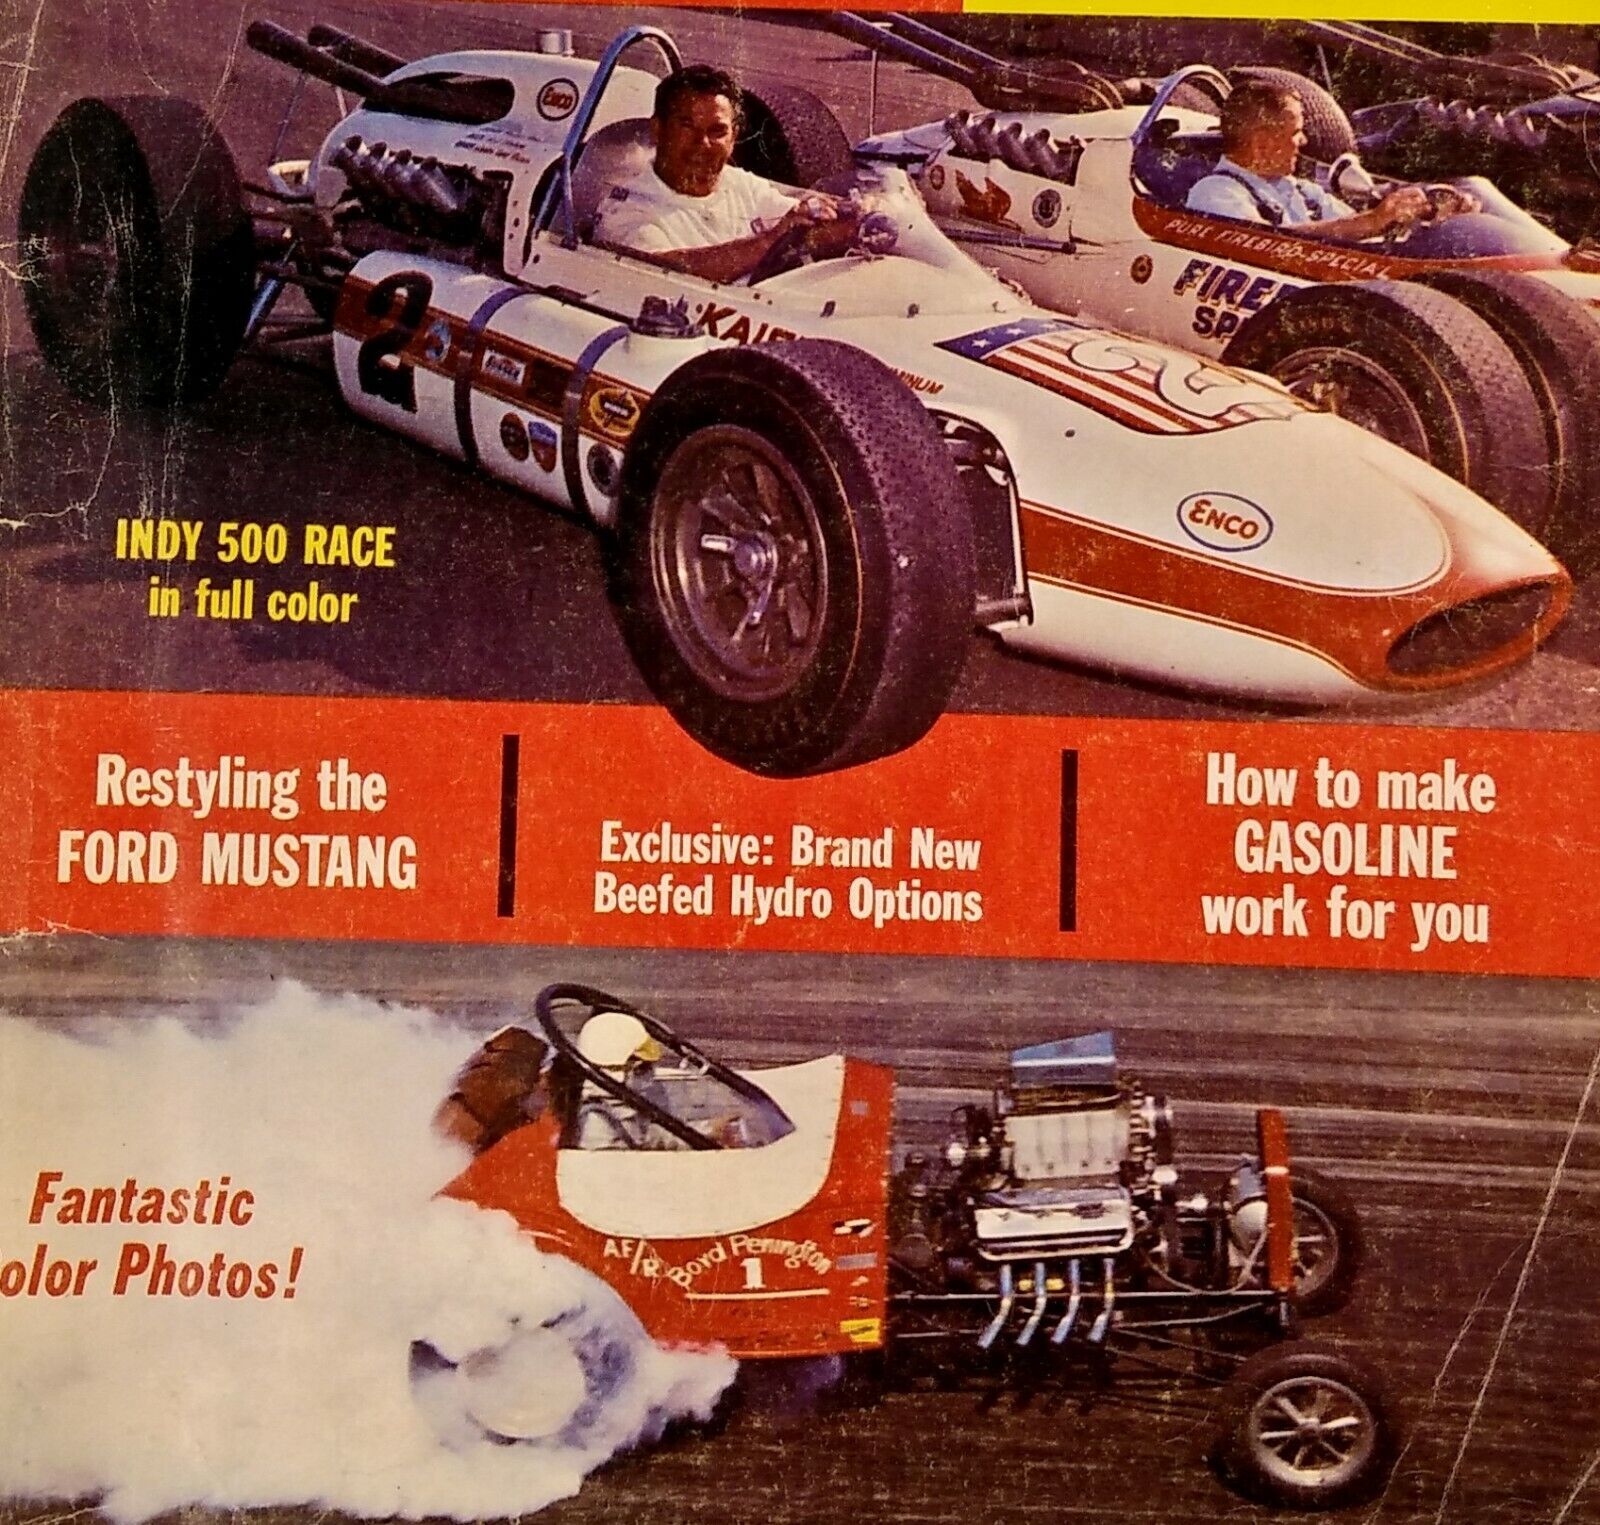 Modern Rod 1964 Vol 1 No 4 Scrap Crafting Salvage Mustang 460 Hydro Dragsters